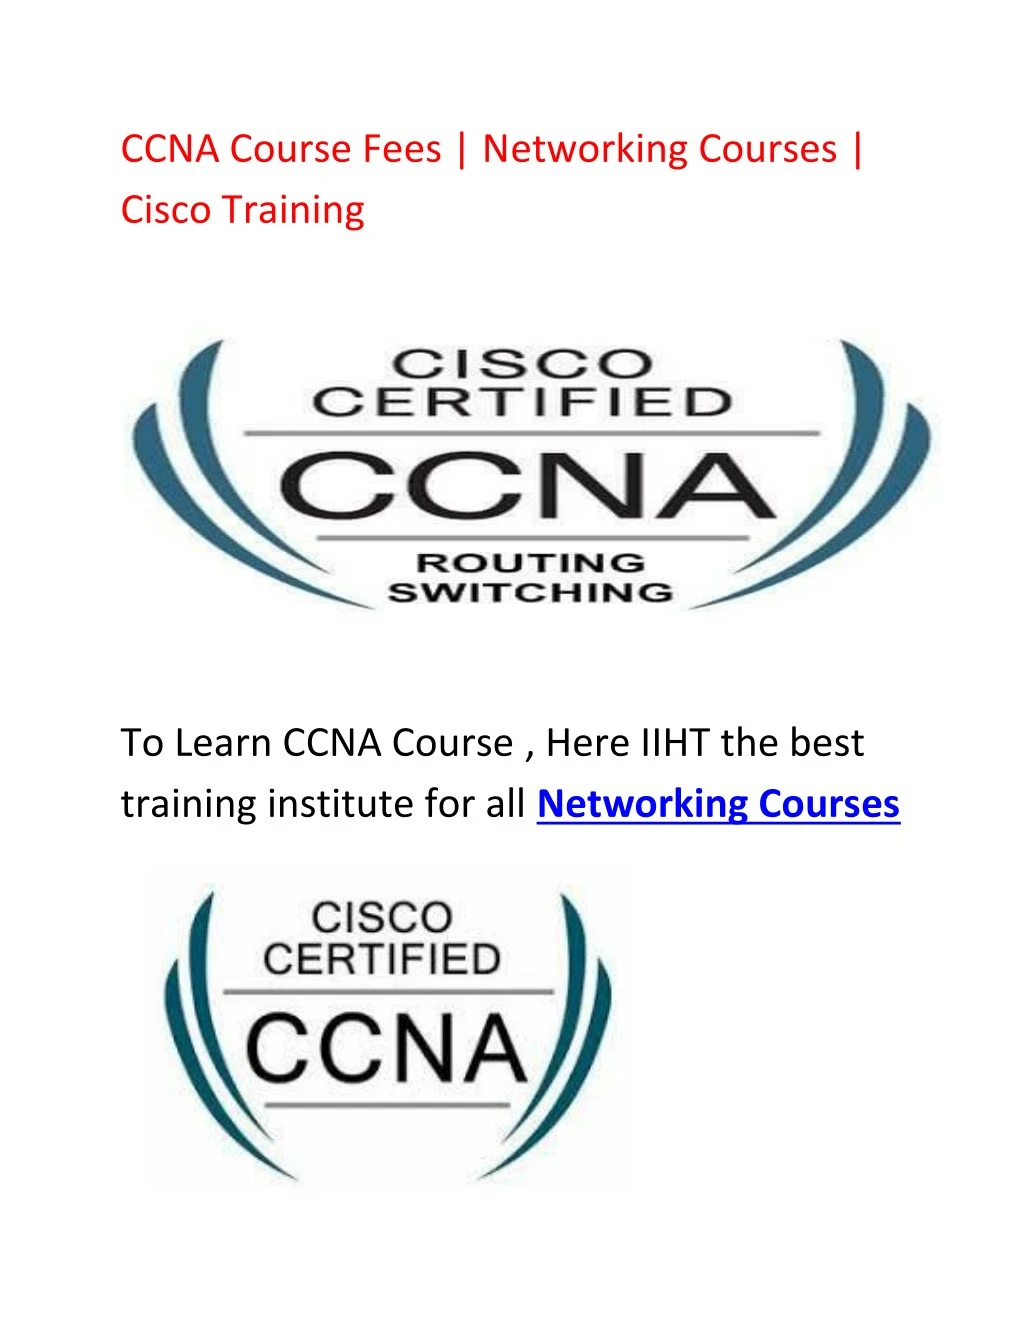 ccna course fees networking courses cisco training